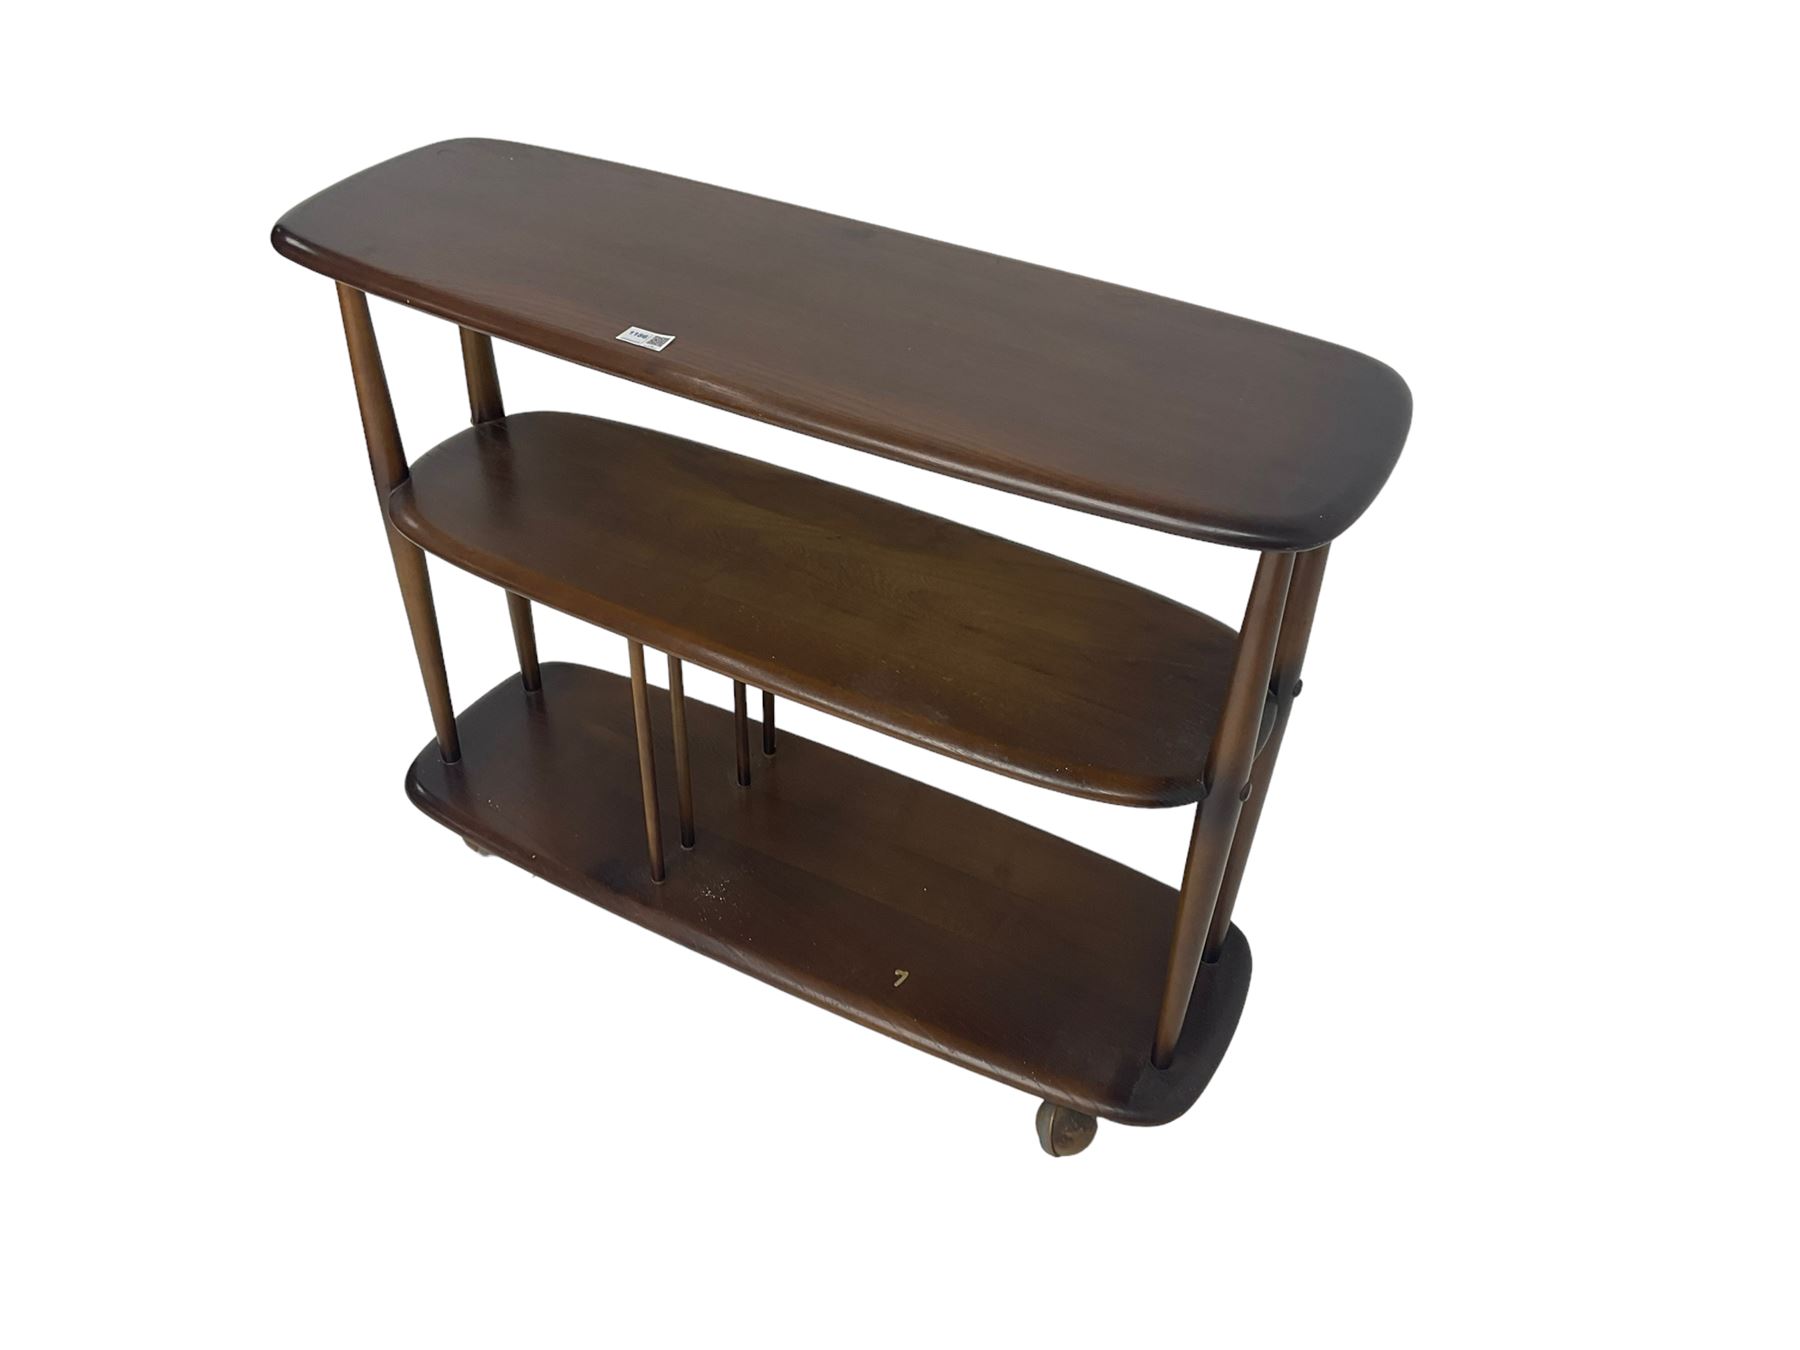 Ercol - elm and beech three tier stand on castors - Image 6 of 6